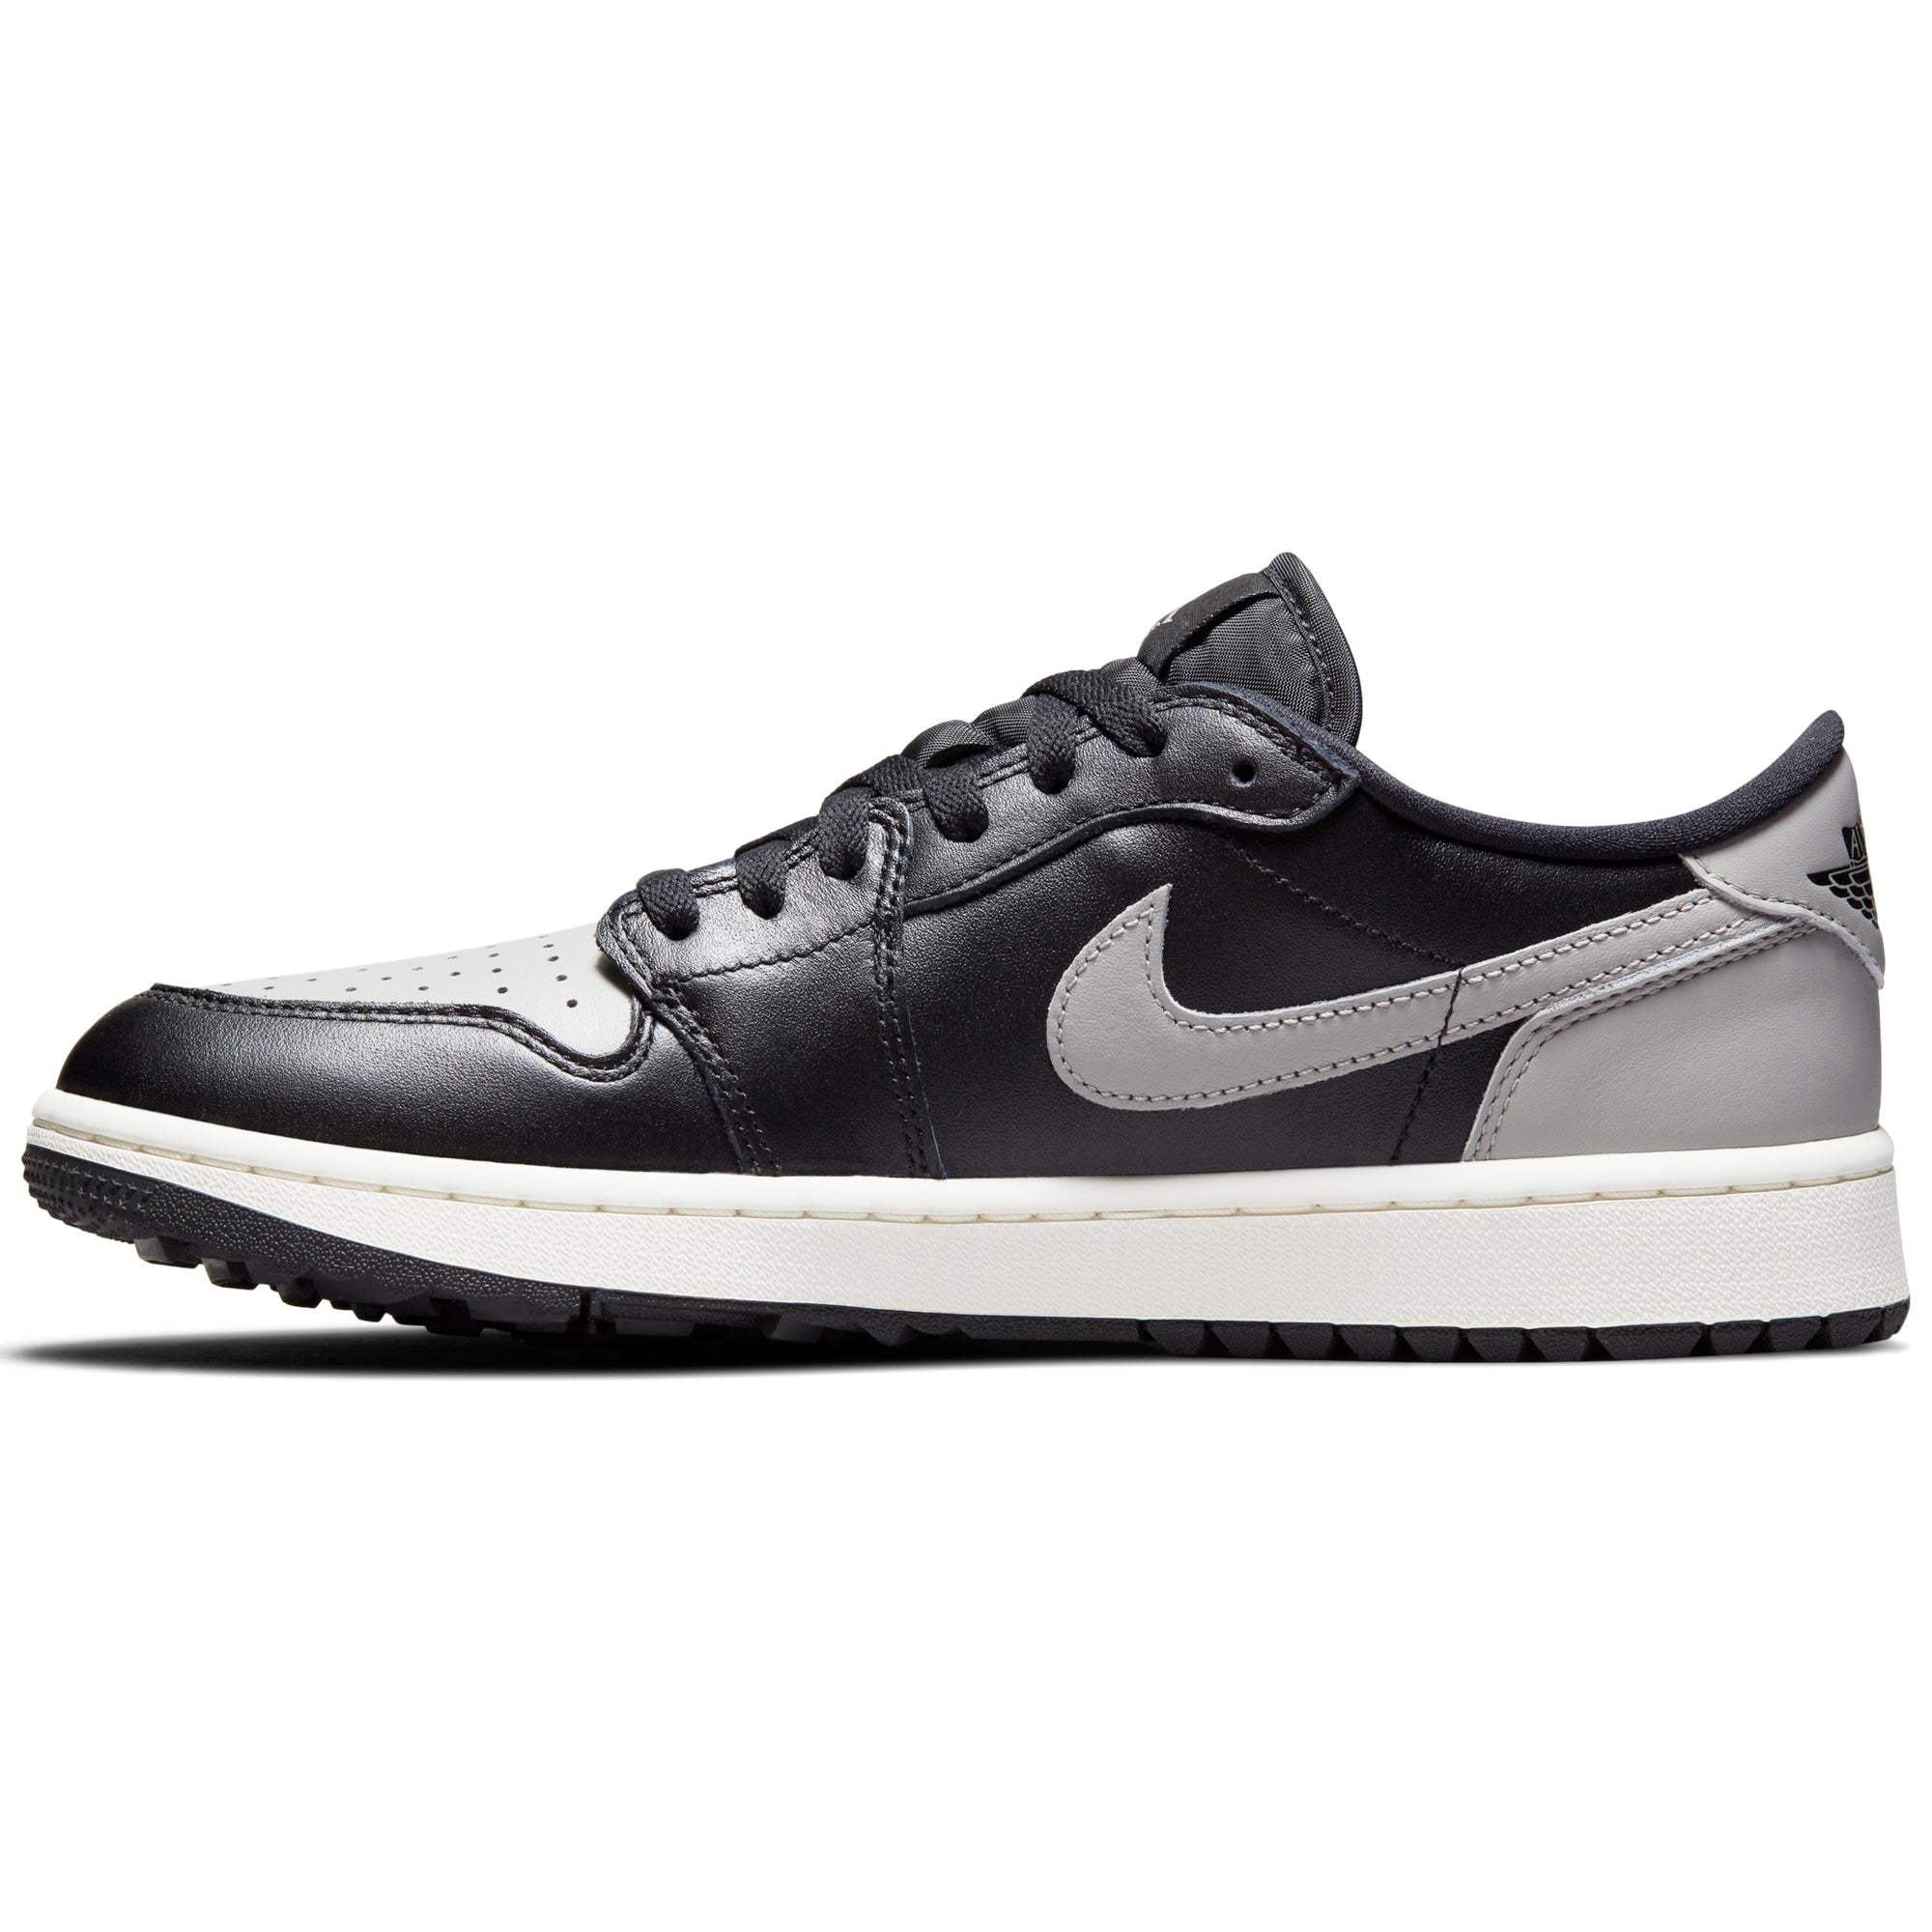 Nike Air 1 Low G Golf Shoes DD9315 Black Grey Sail 001 | Function18 | Restrictedgs